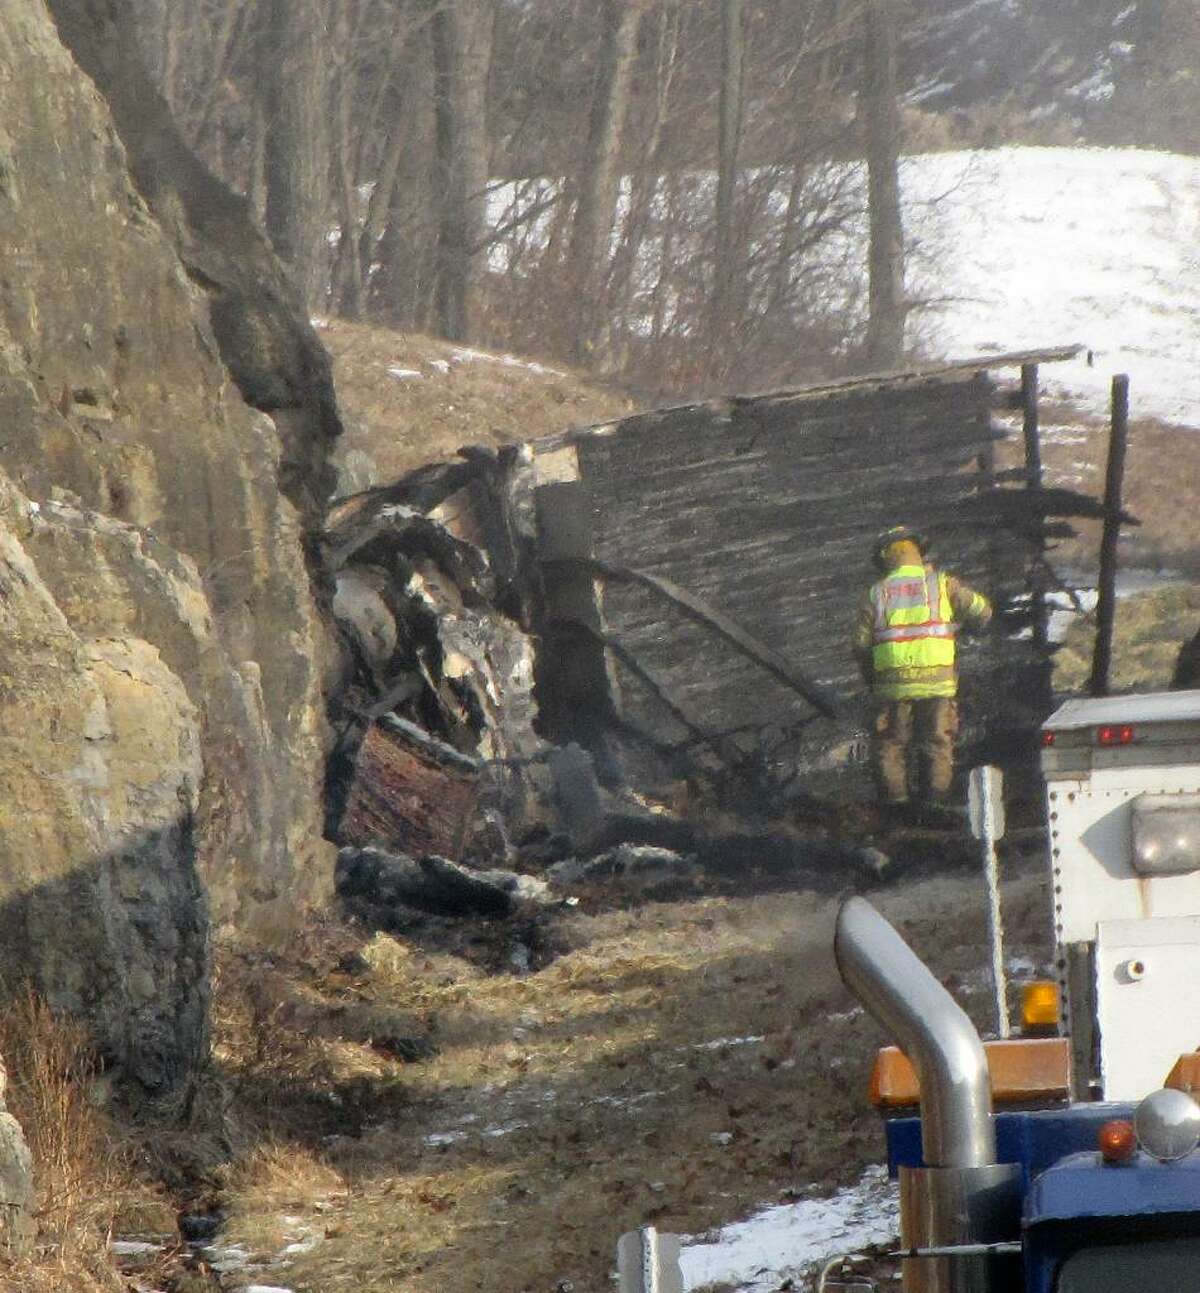 A firefighter sifts through the wreckage at the scene of a tractor-trailer accident on the New York State Thruway between exits 20 and 21 in which the driver died.